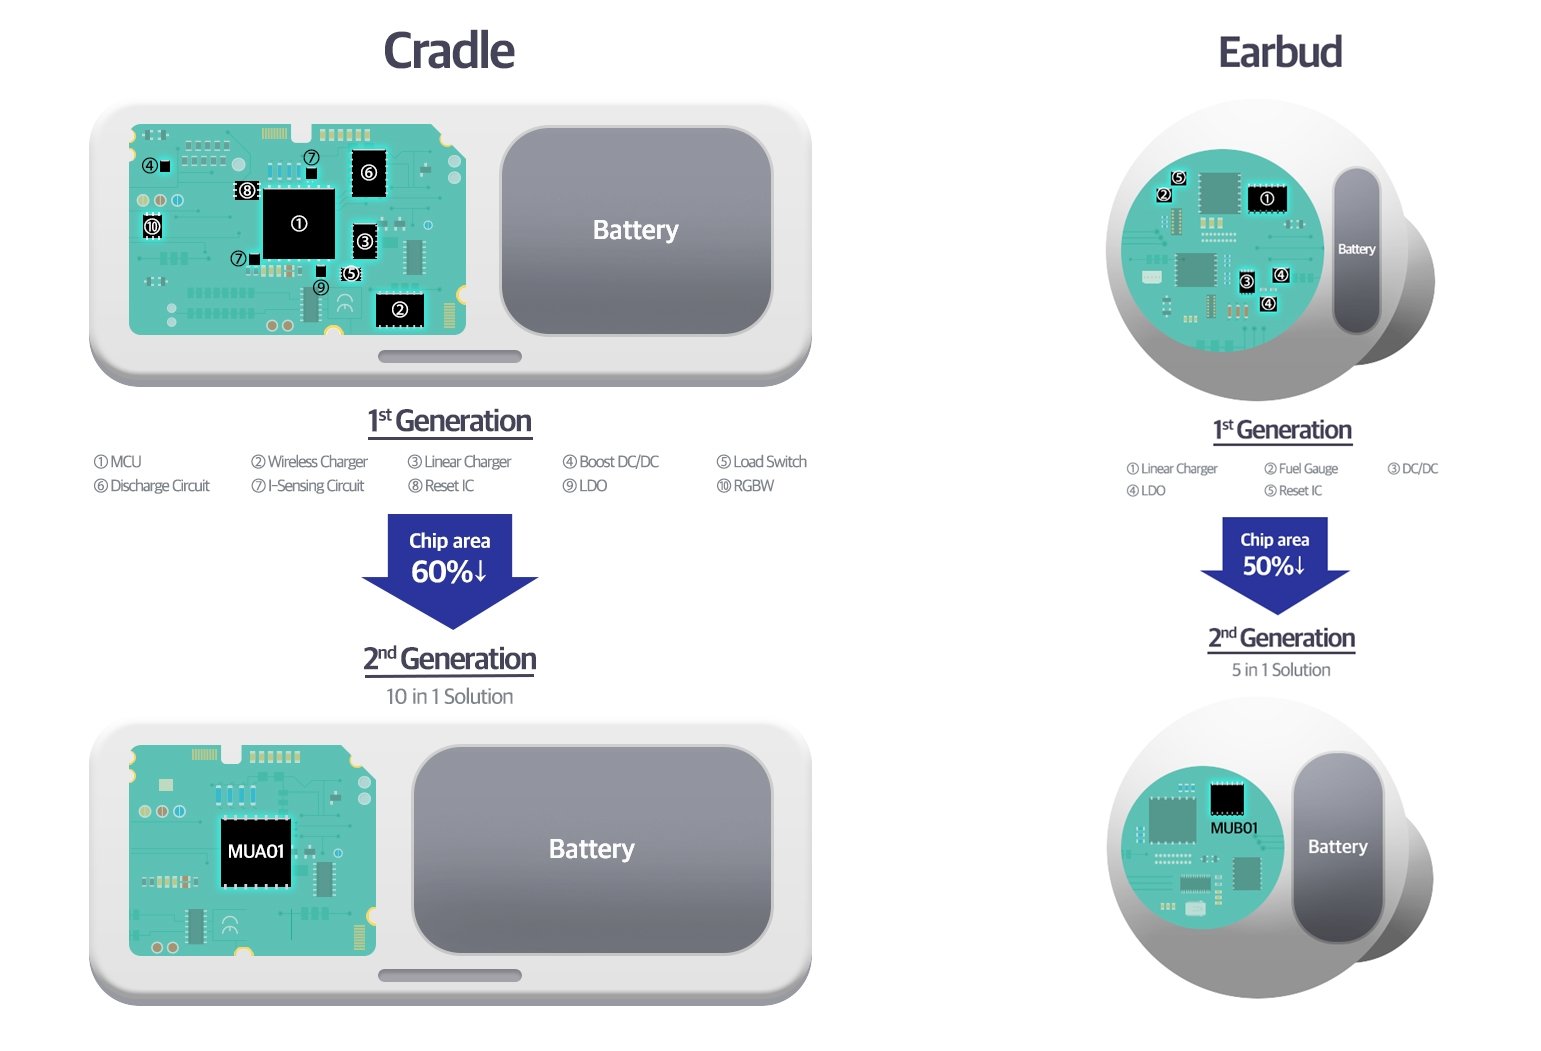 Samsung MUA01 MUB01 All-In-One Power Management IC Infographic